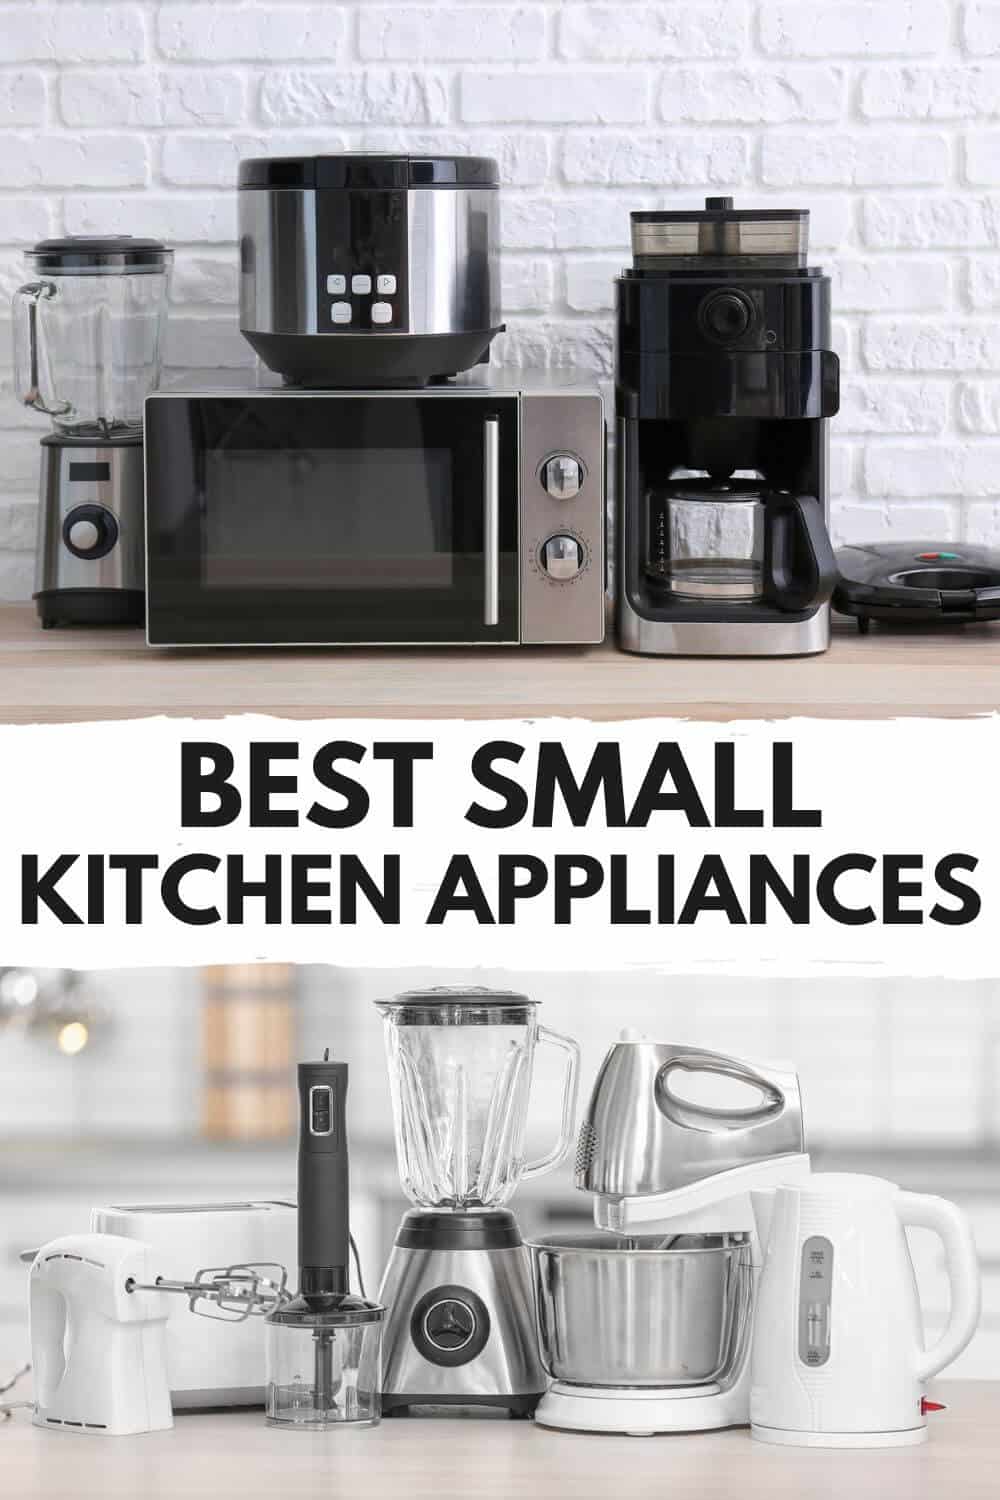 Top-rated small kitchen appliances.